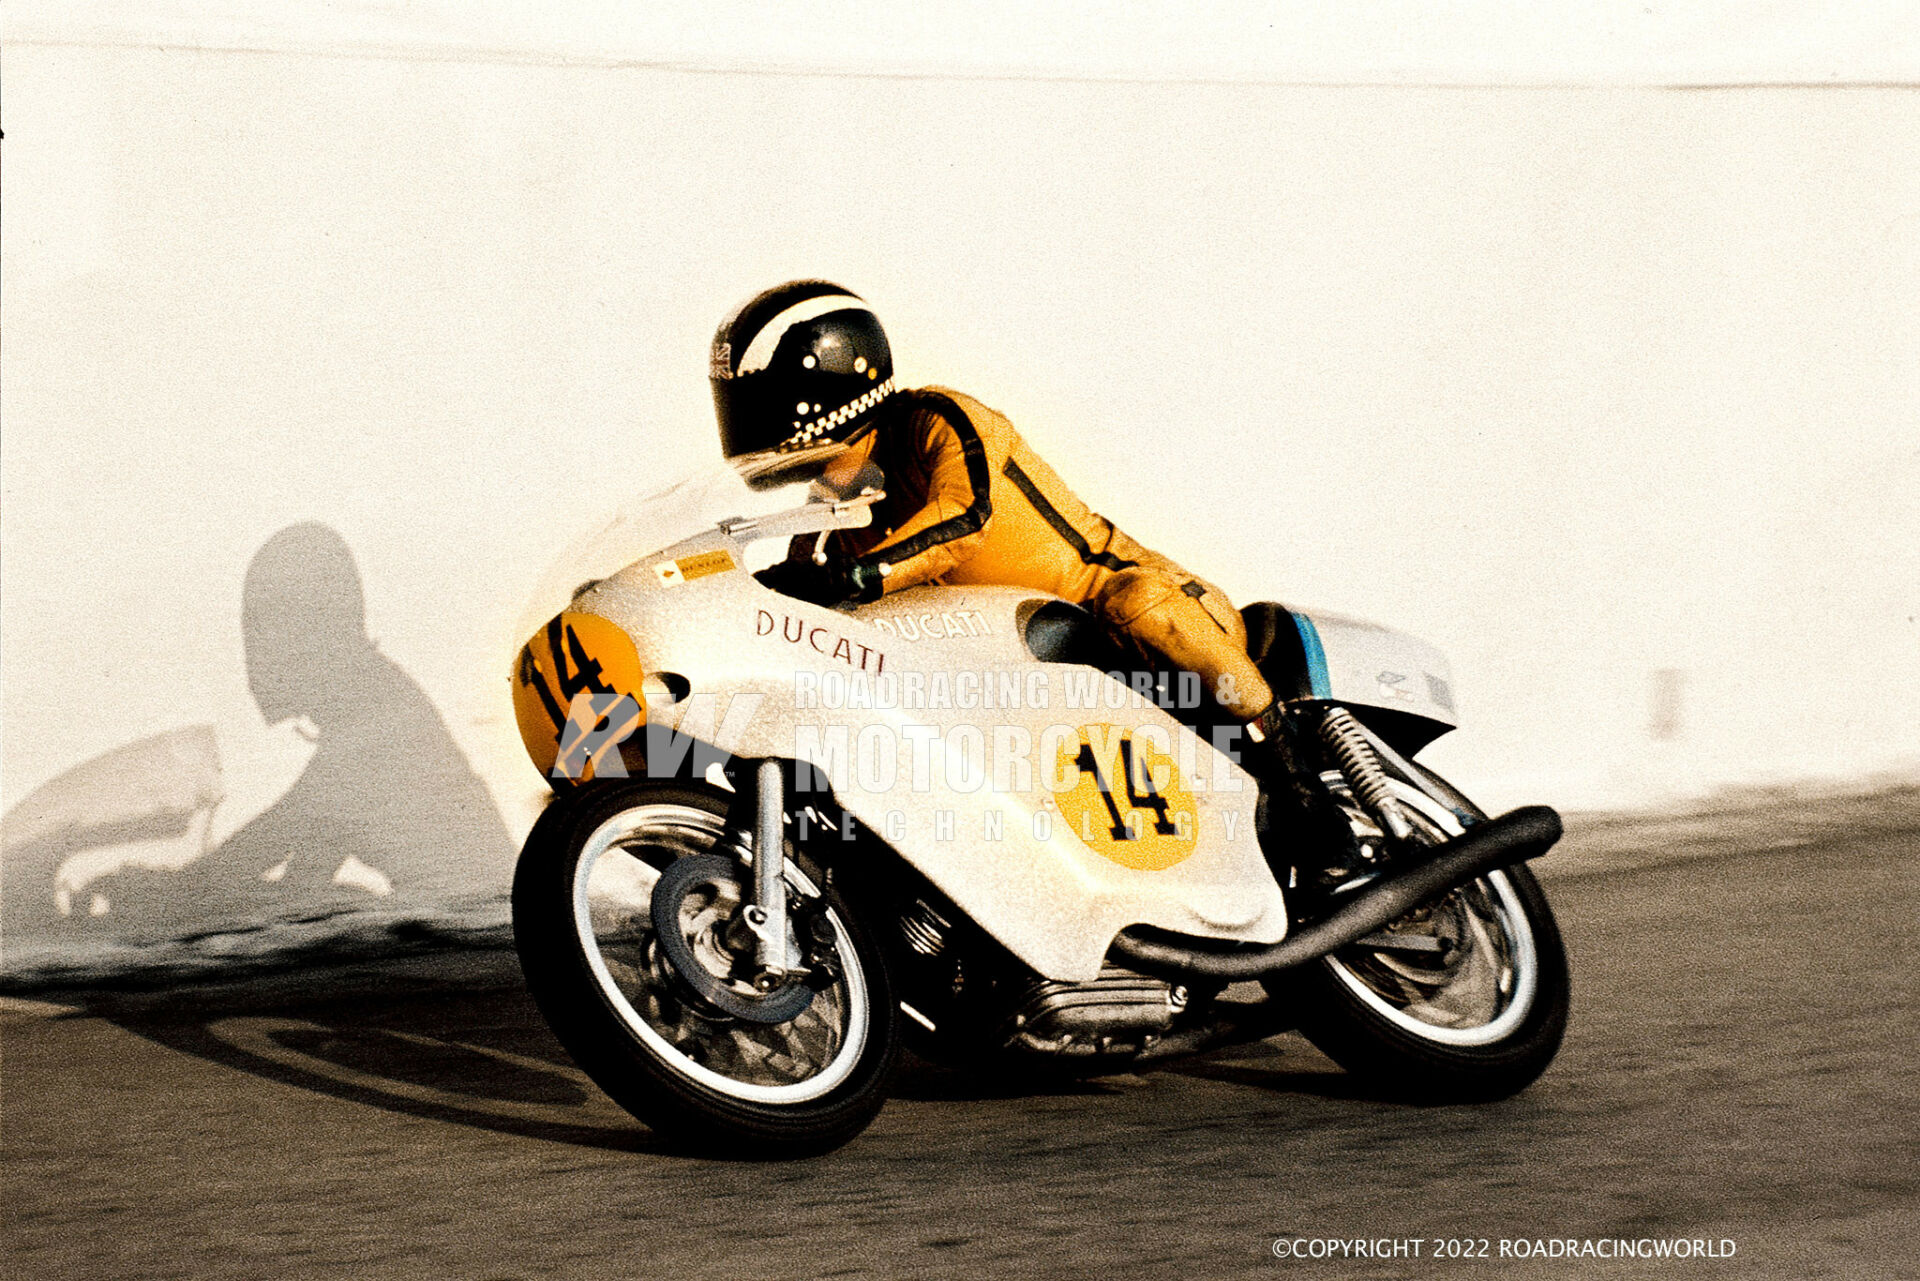 The late Phil Read (14) in 1971, riding Ducati's first GP racebike, a 500cc V-Twin. Photo courtesy Ducati Museum. 